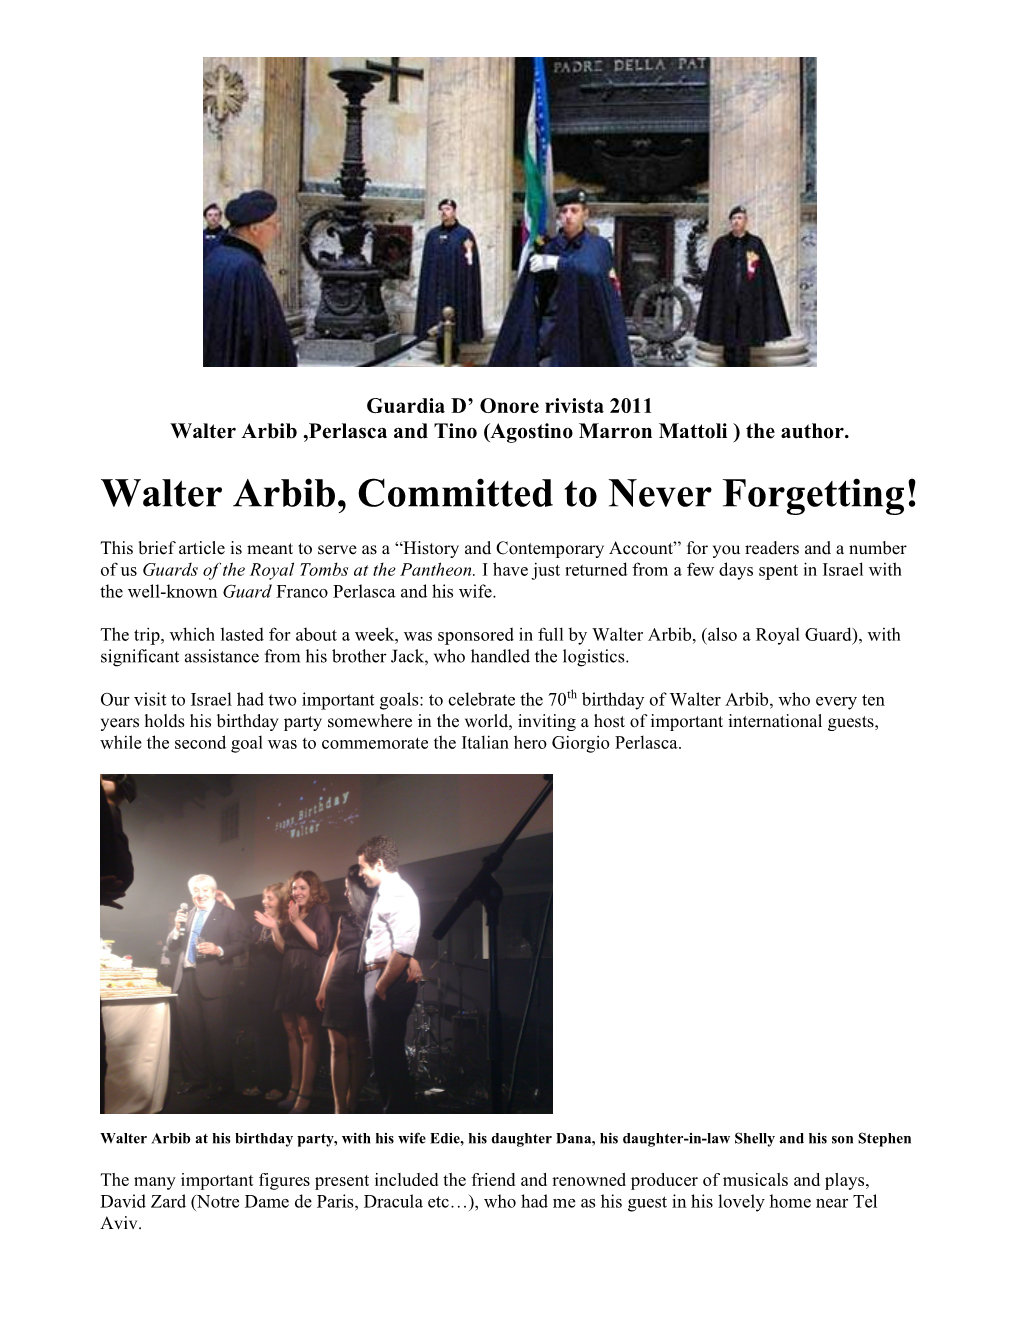 Walter Arbib, Committed to Never Forgetting!